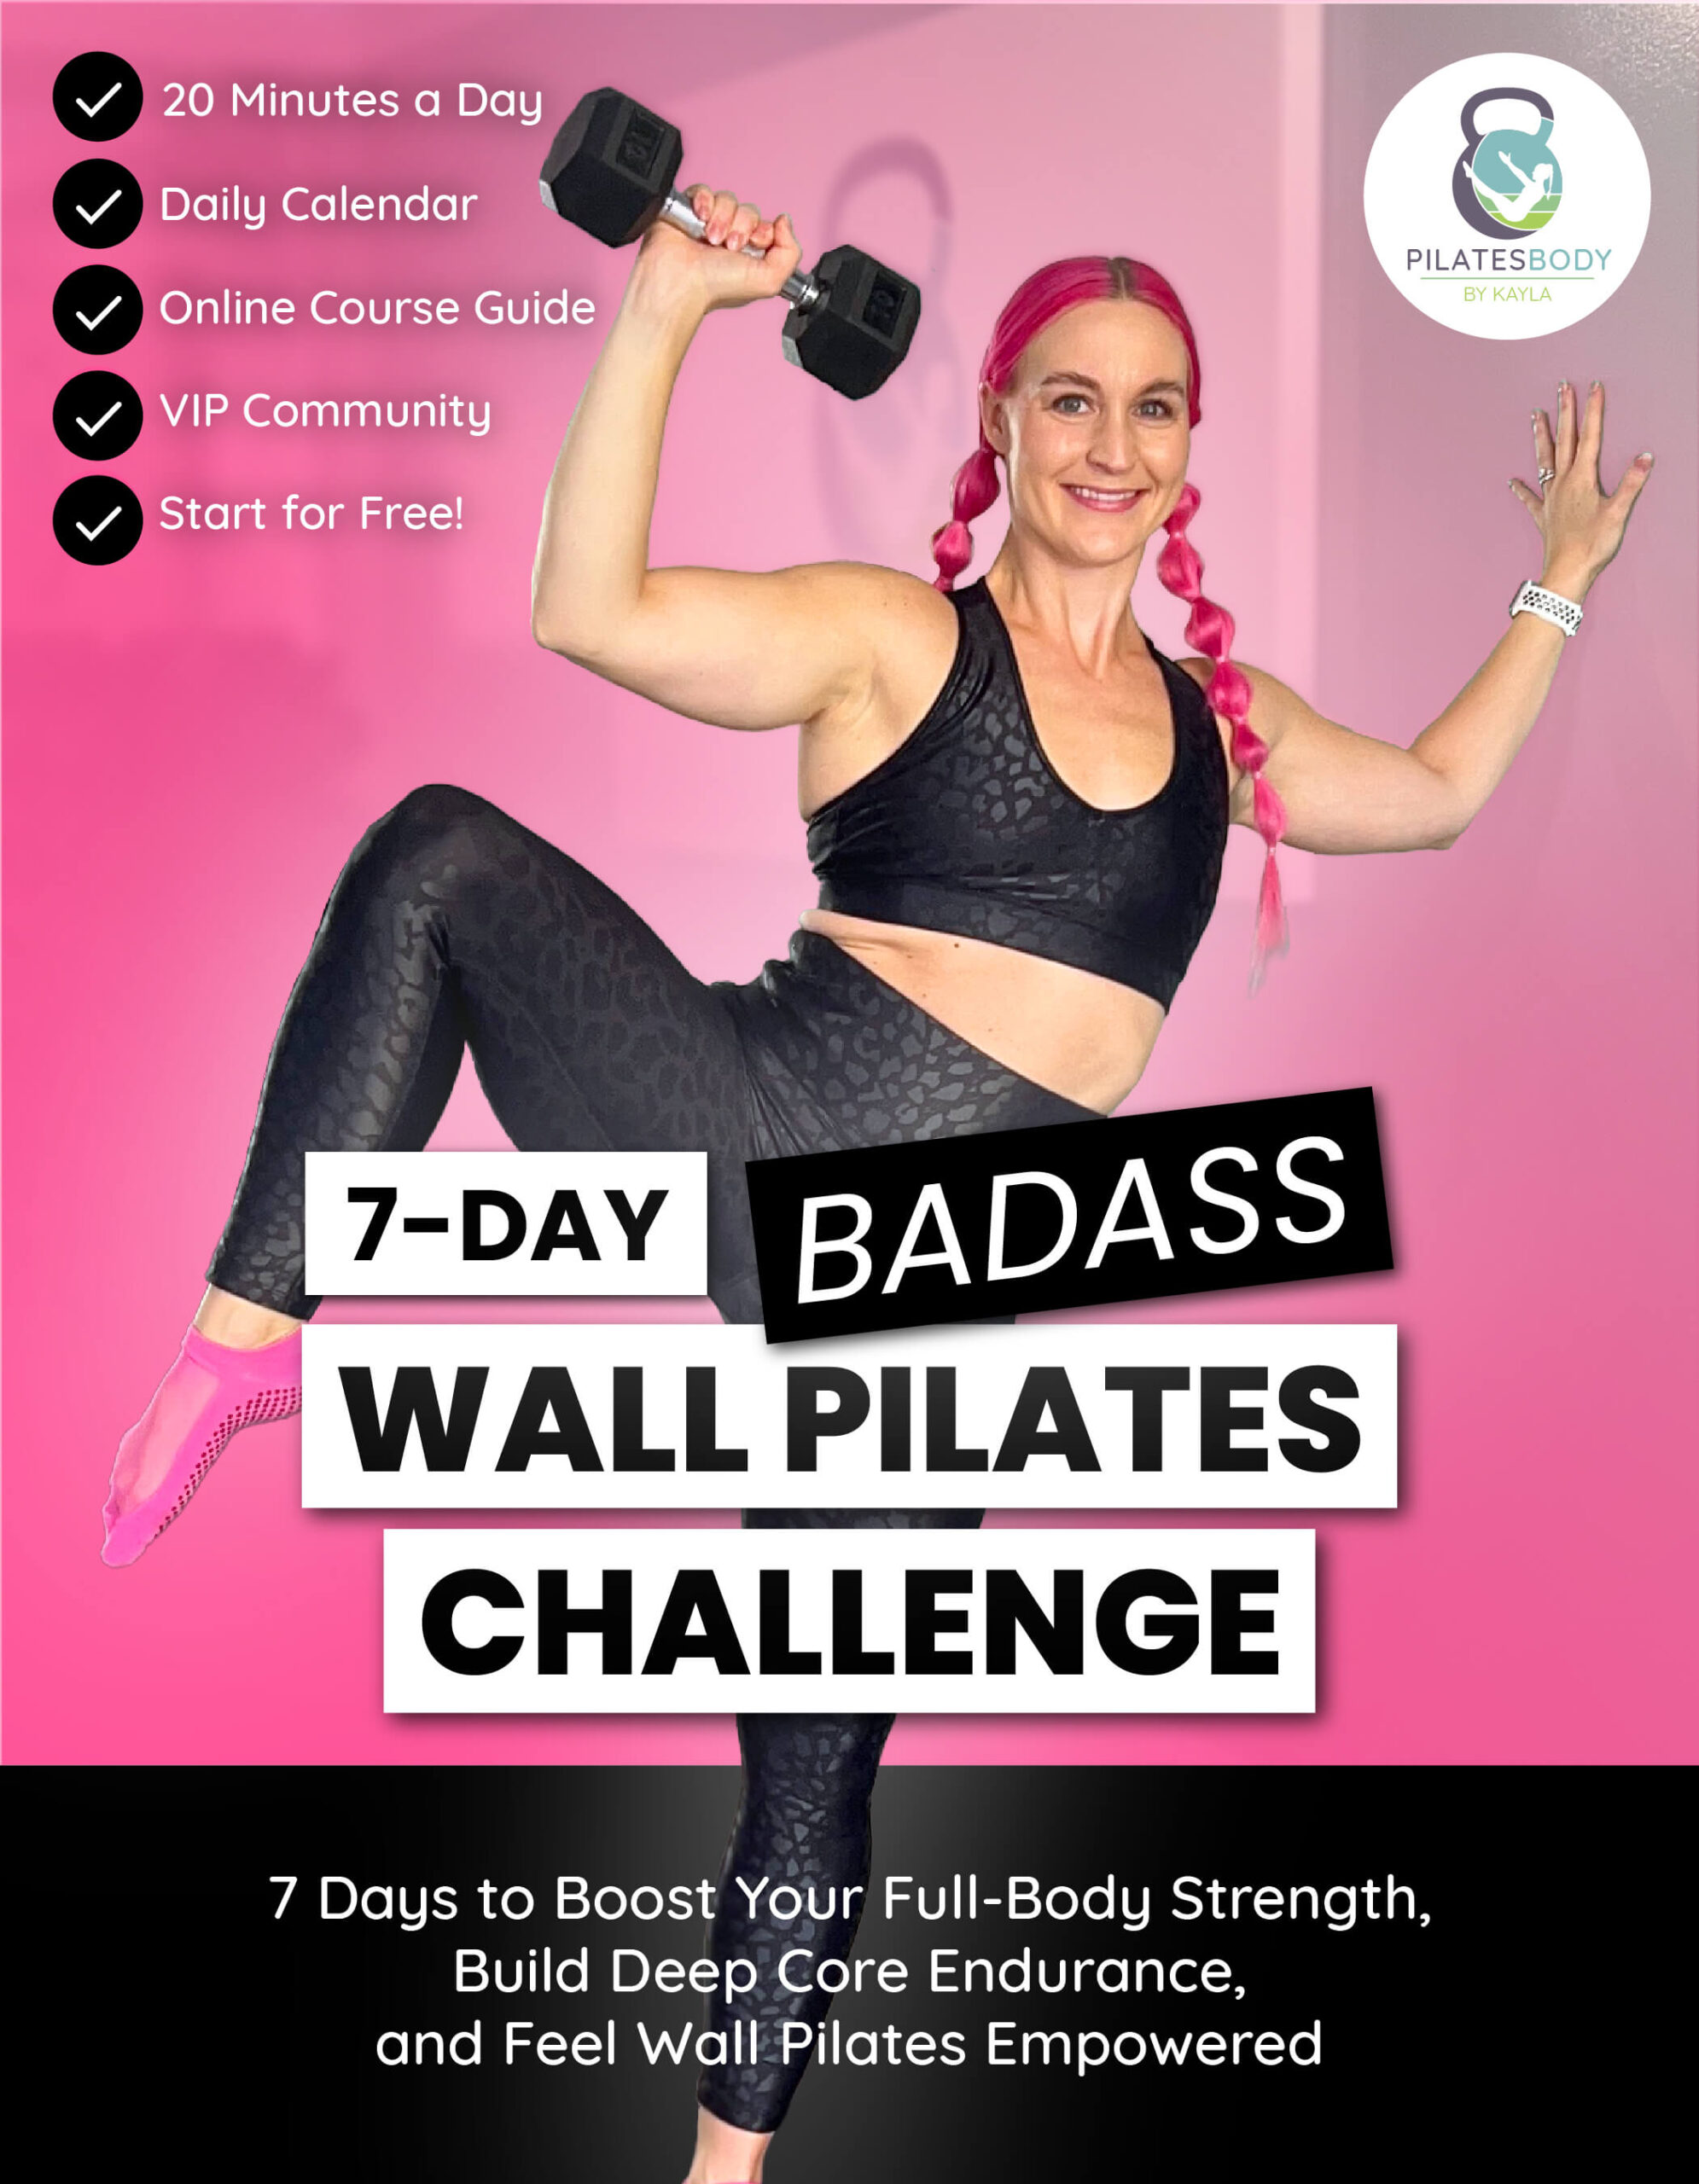 Stream [PDF] 💖 Wall Pilates For Seniors: Step-by-step and easy-to